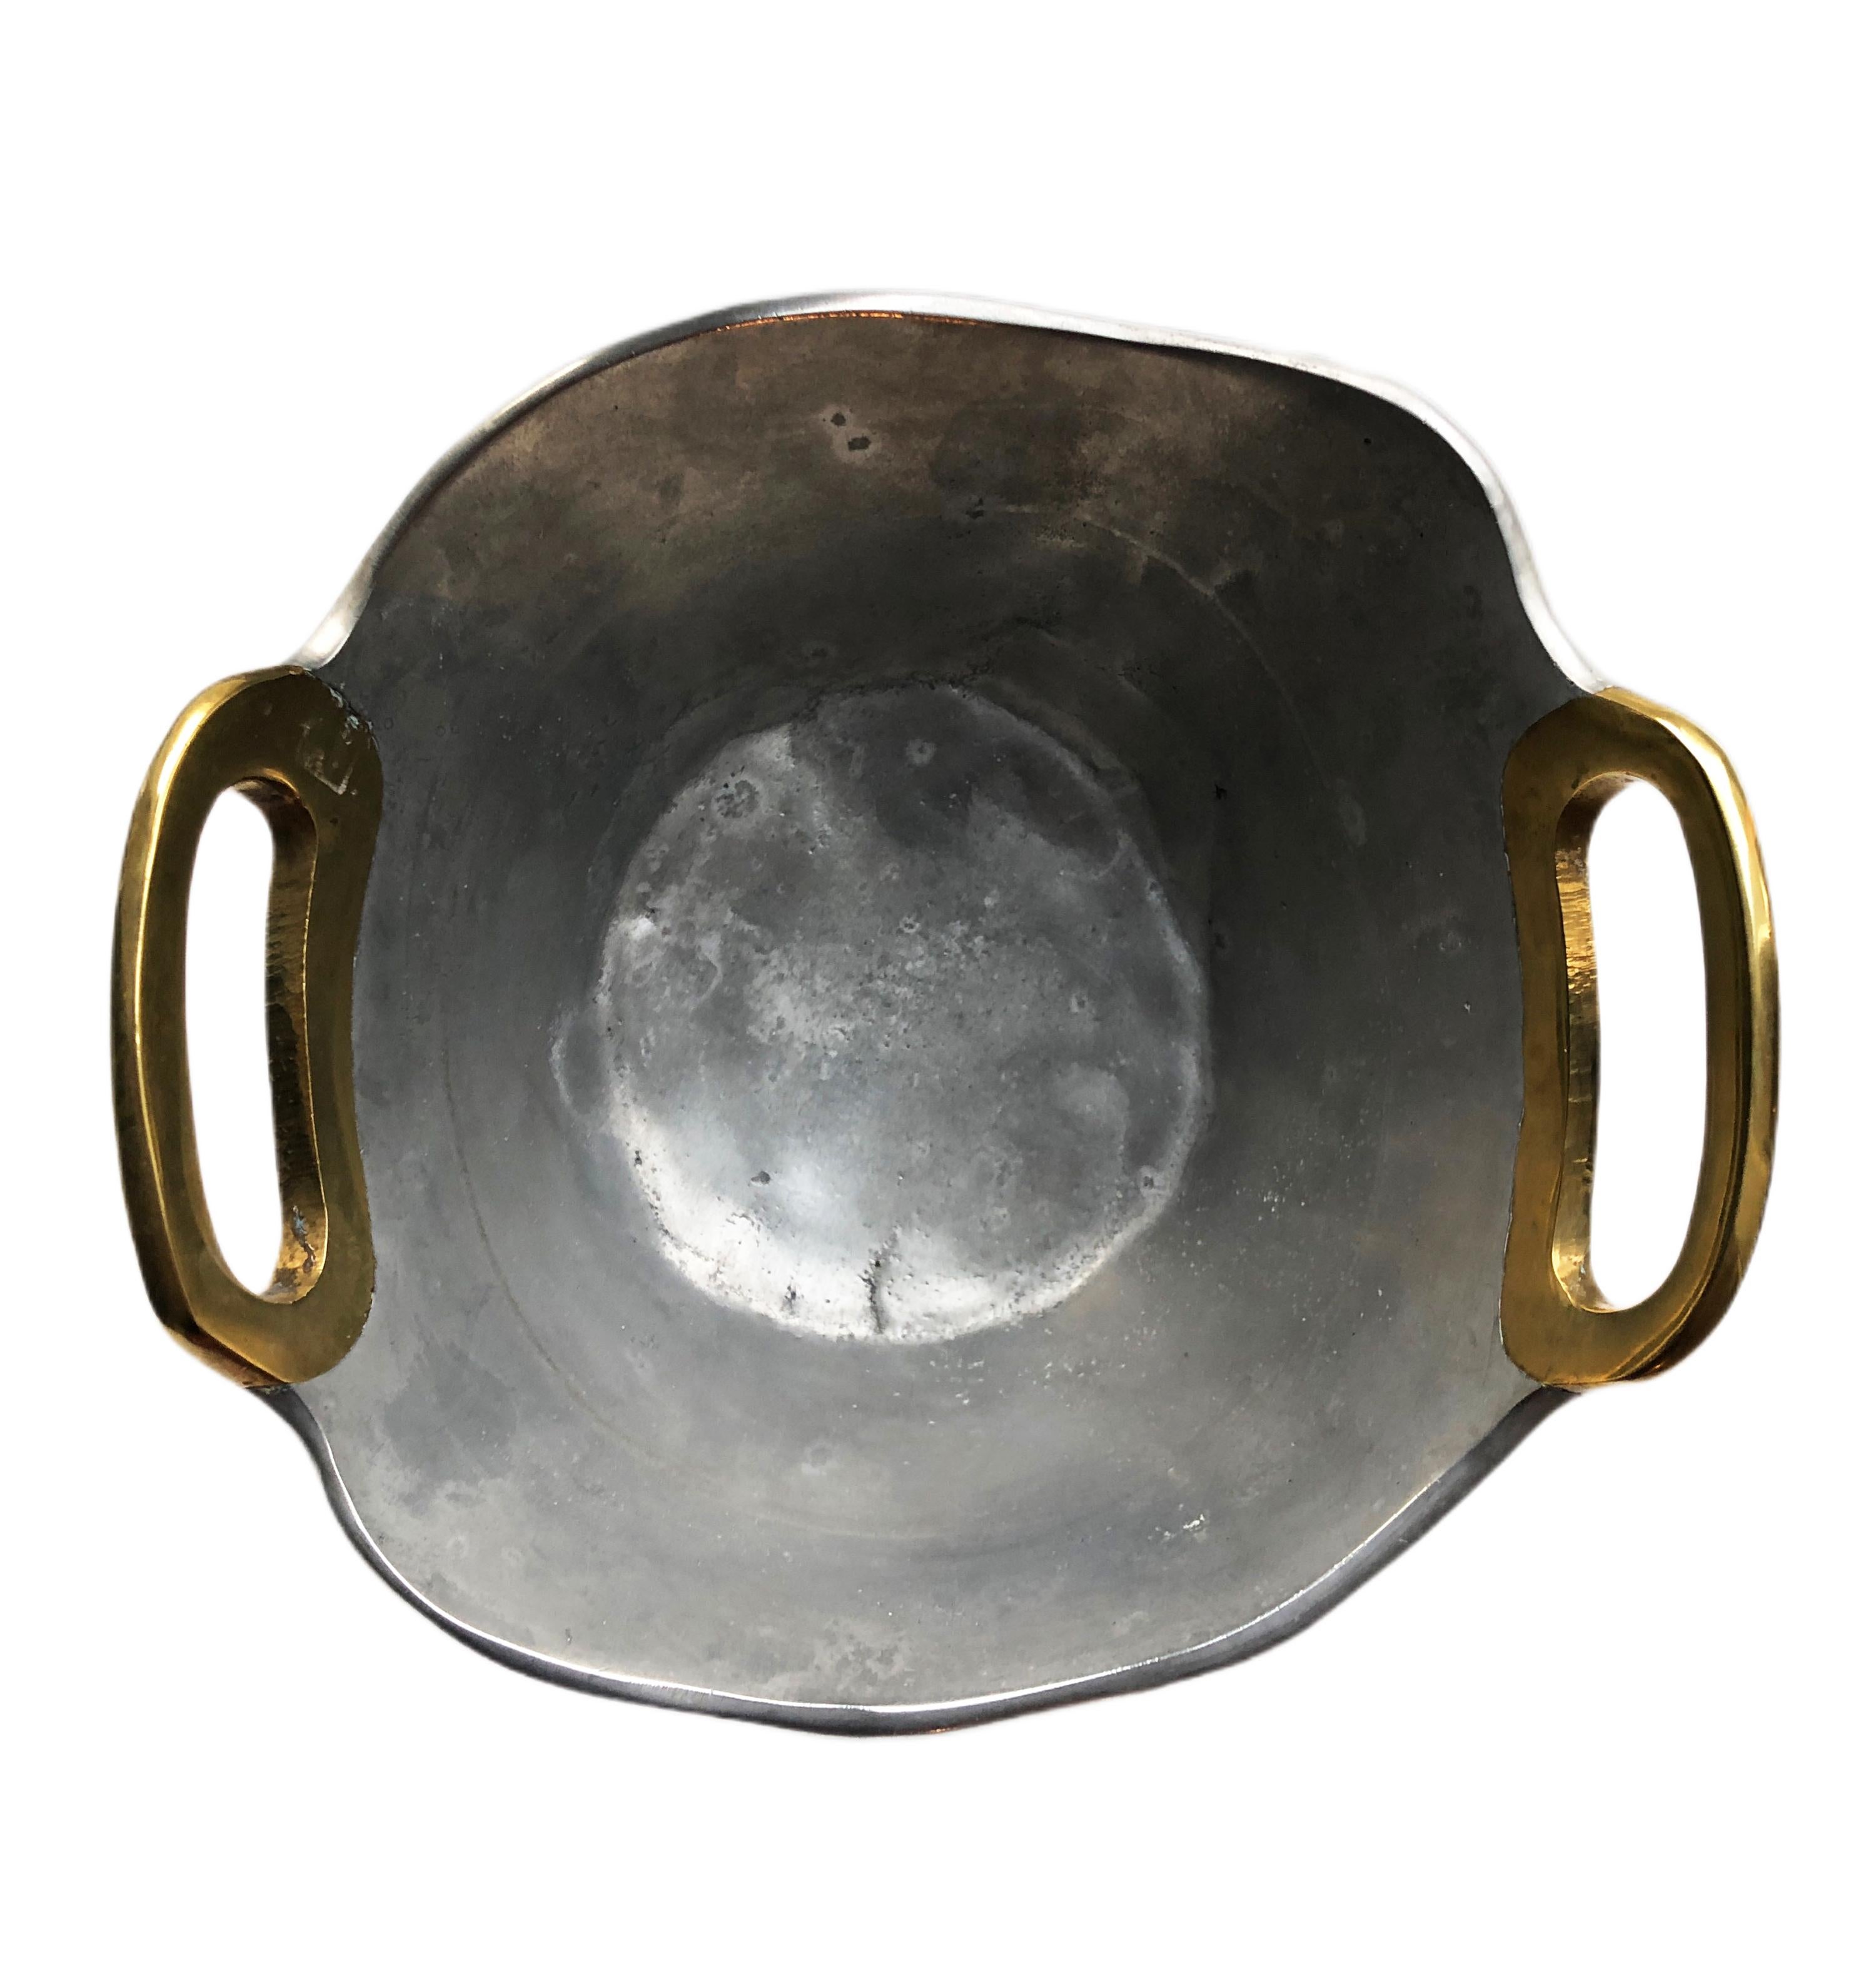 Spanish Brutalist Style Vintage Bowl in Brass Aluminium by David Marshall, Circa 1970s For Sale